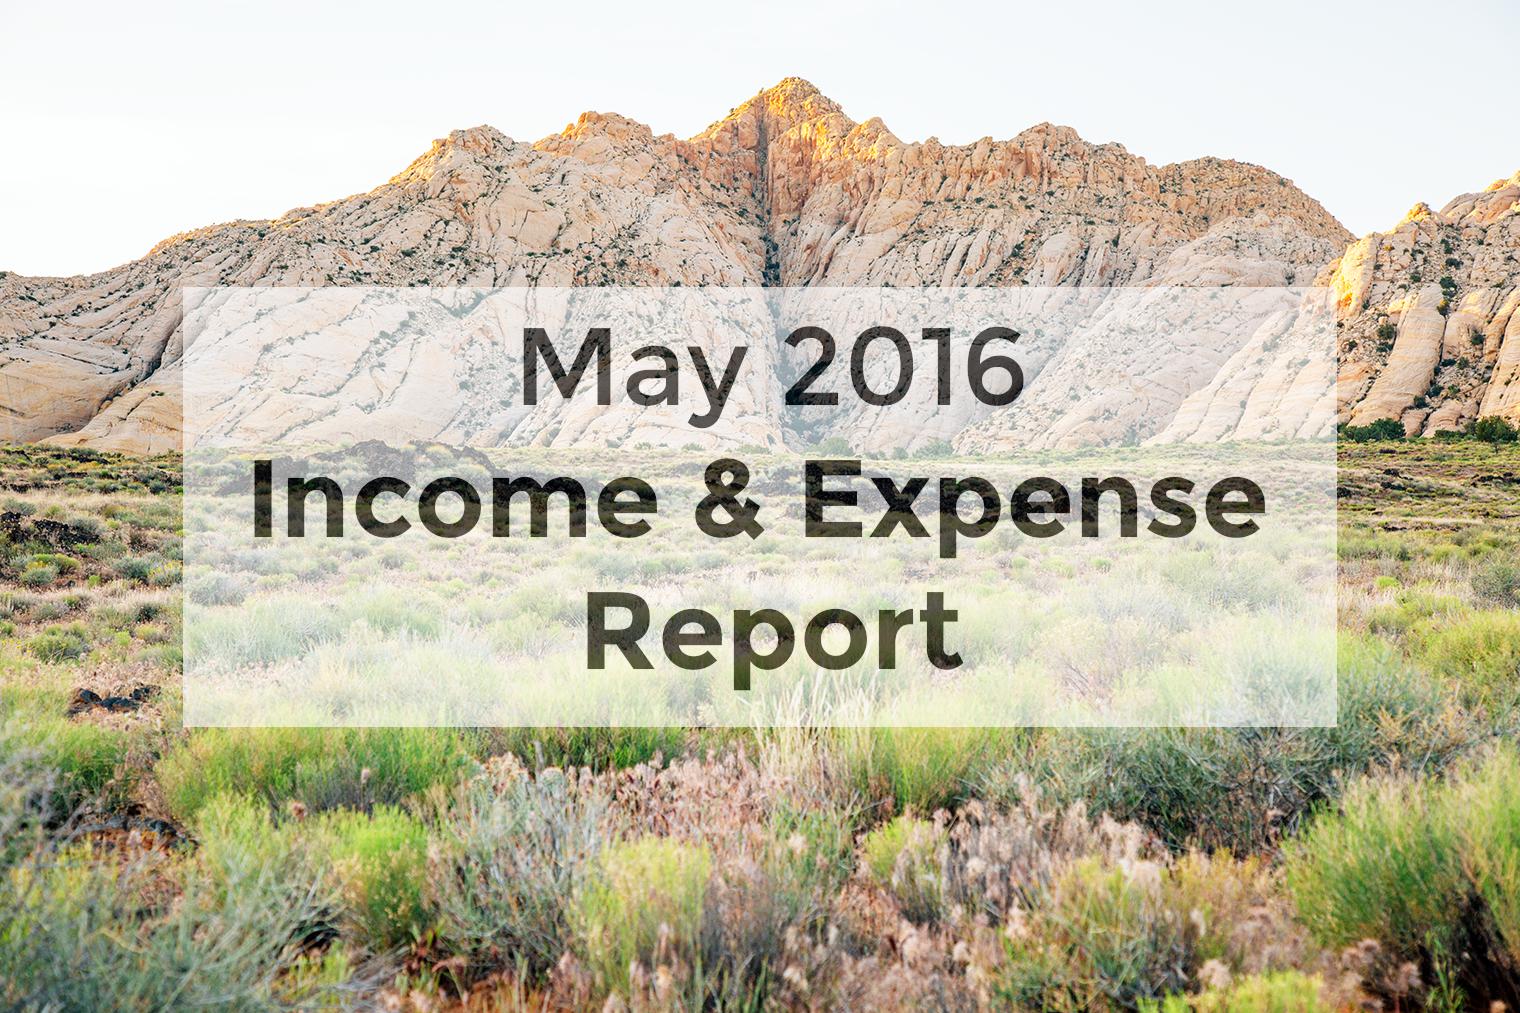 Income & Expense Report – May 2016